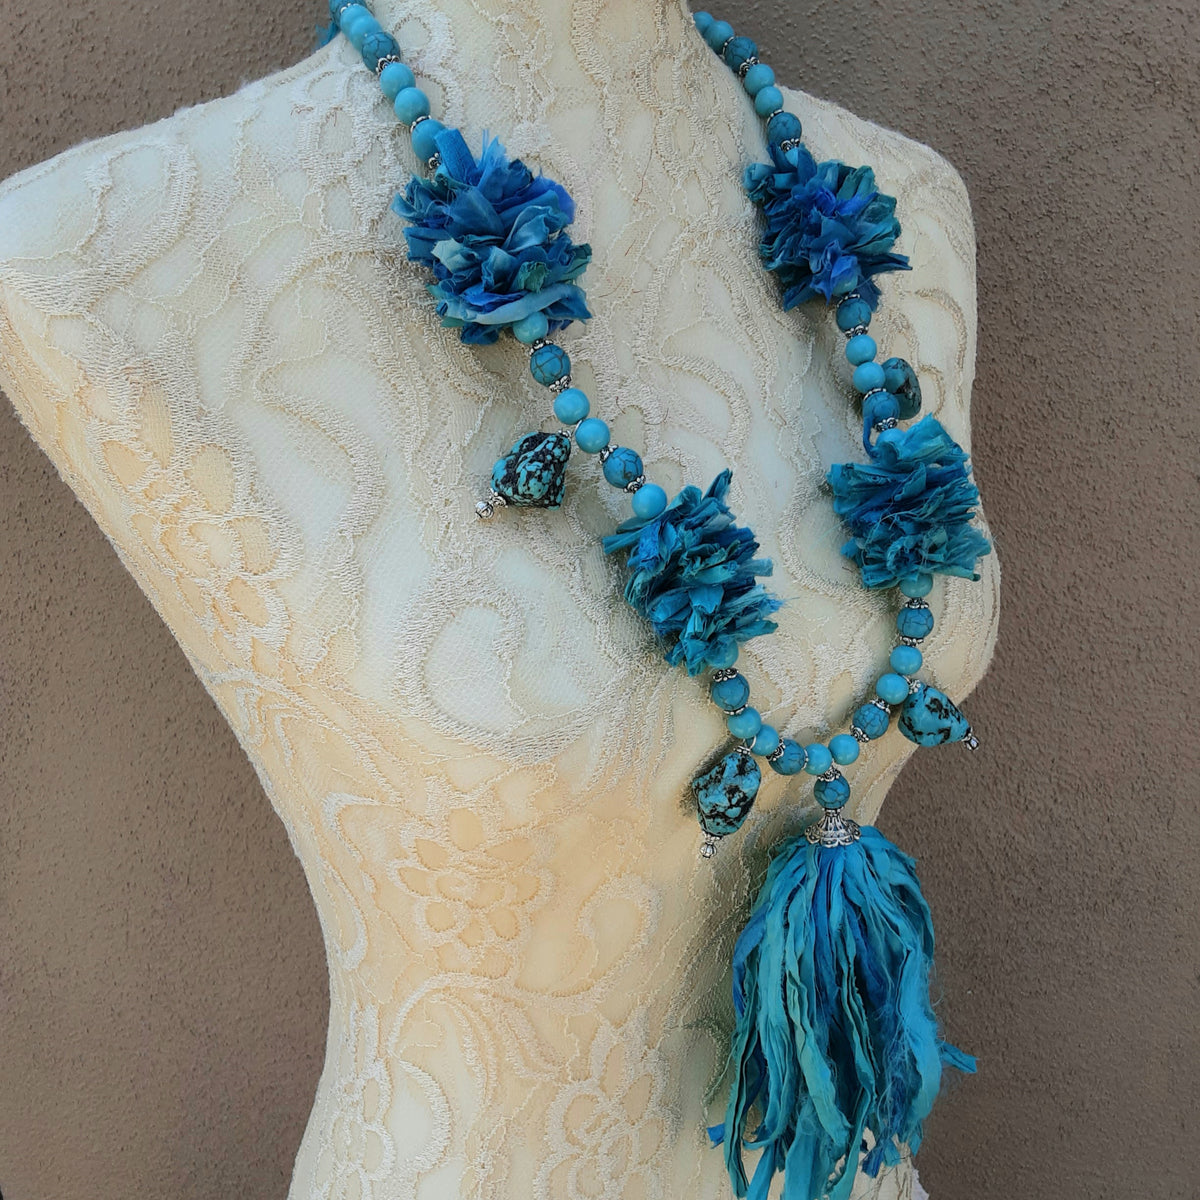 Boho Turquoise Tassel, Recycled Sari Silk Ribbon, Statement Necklace - Fabric Gift for Her